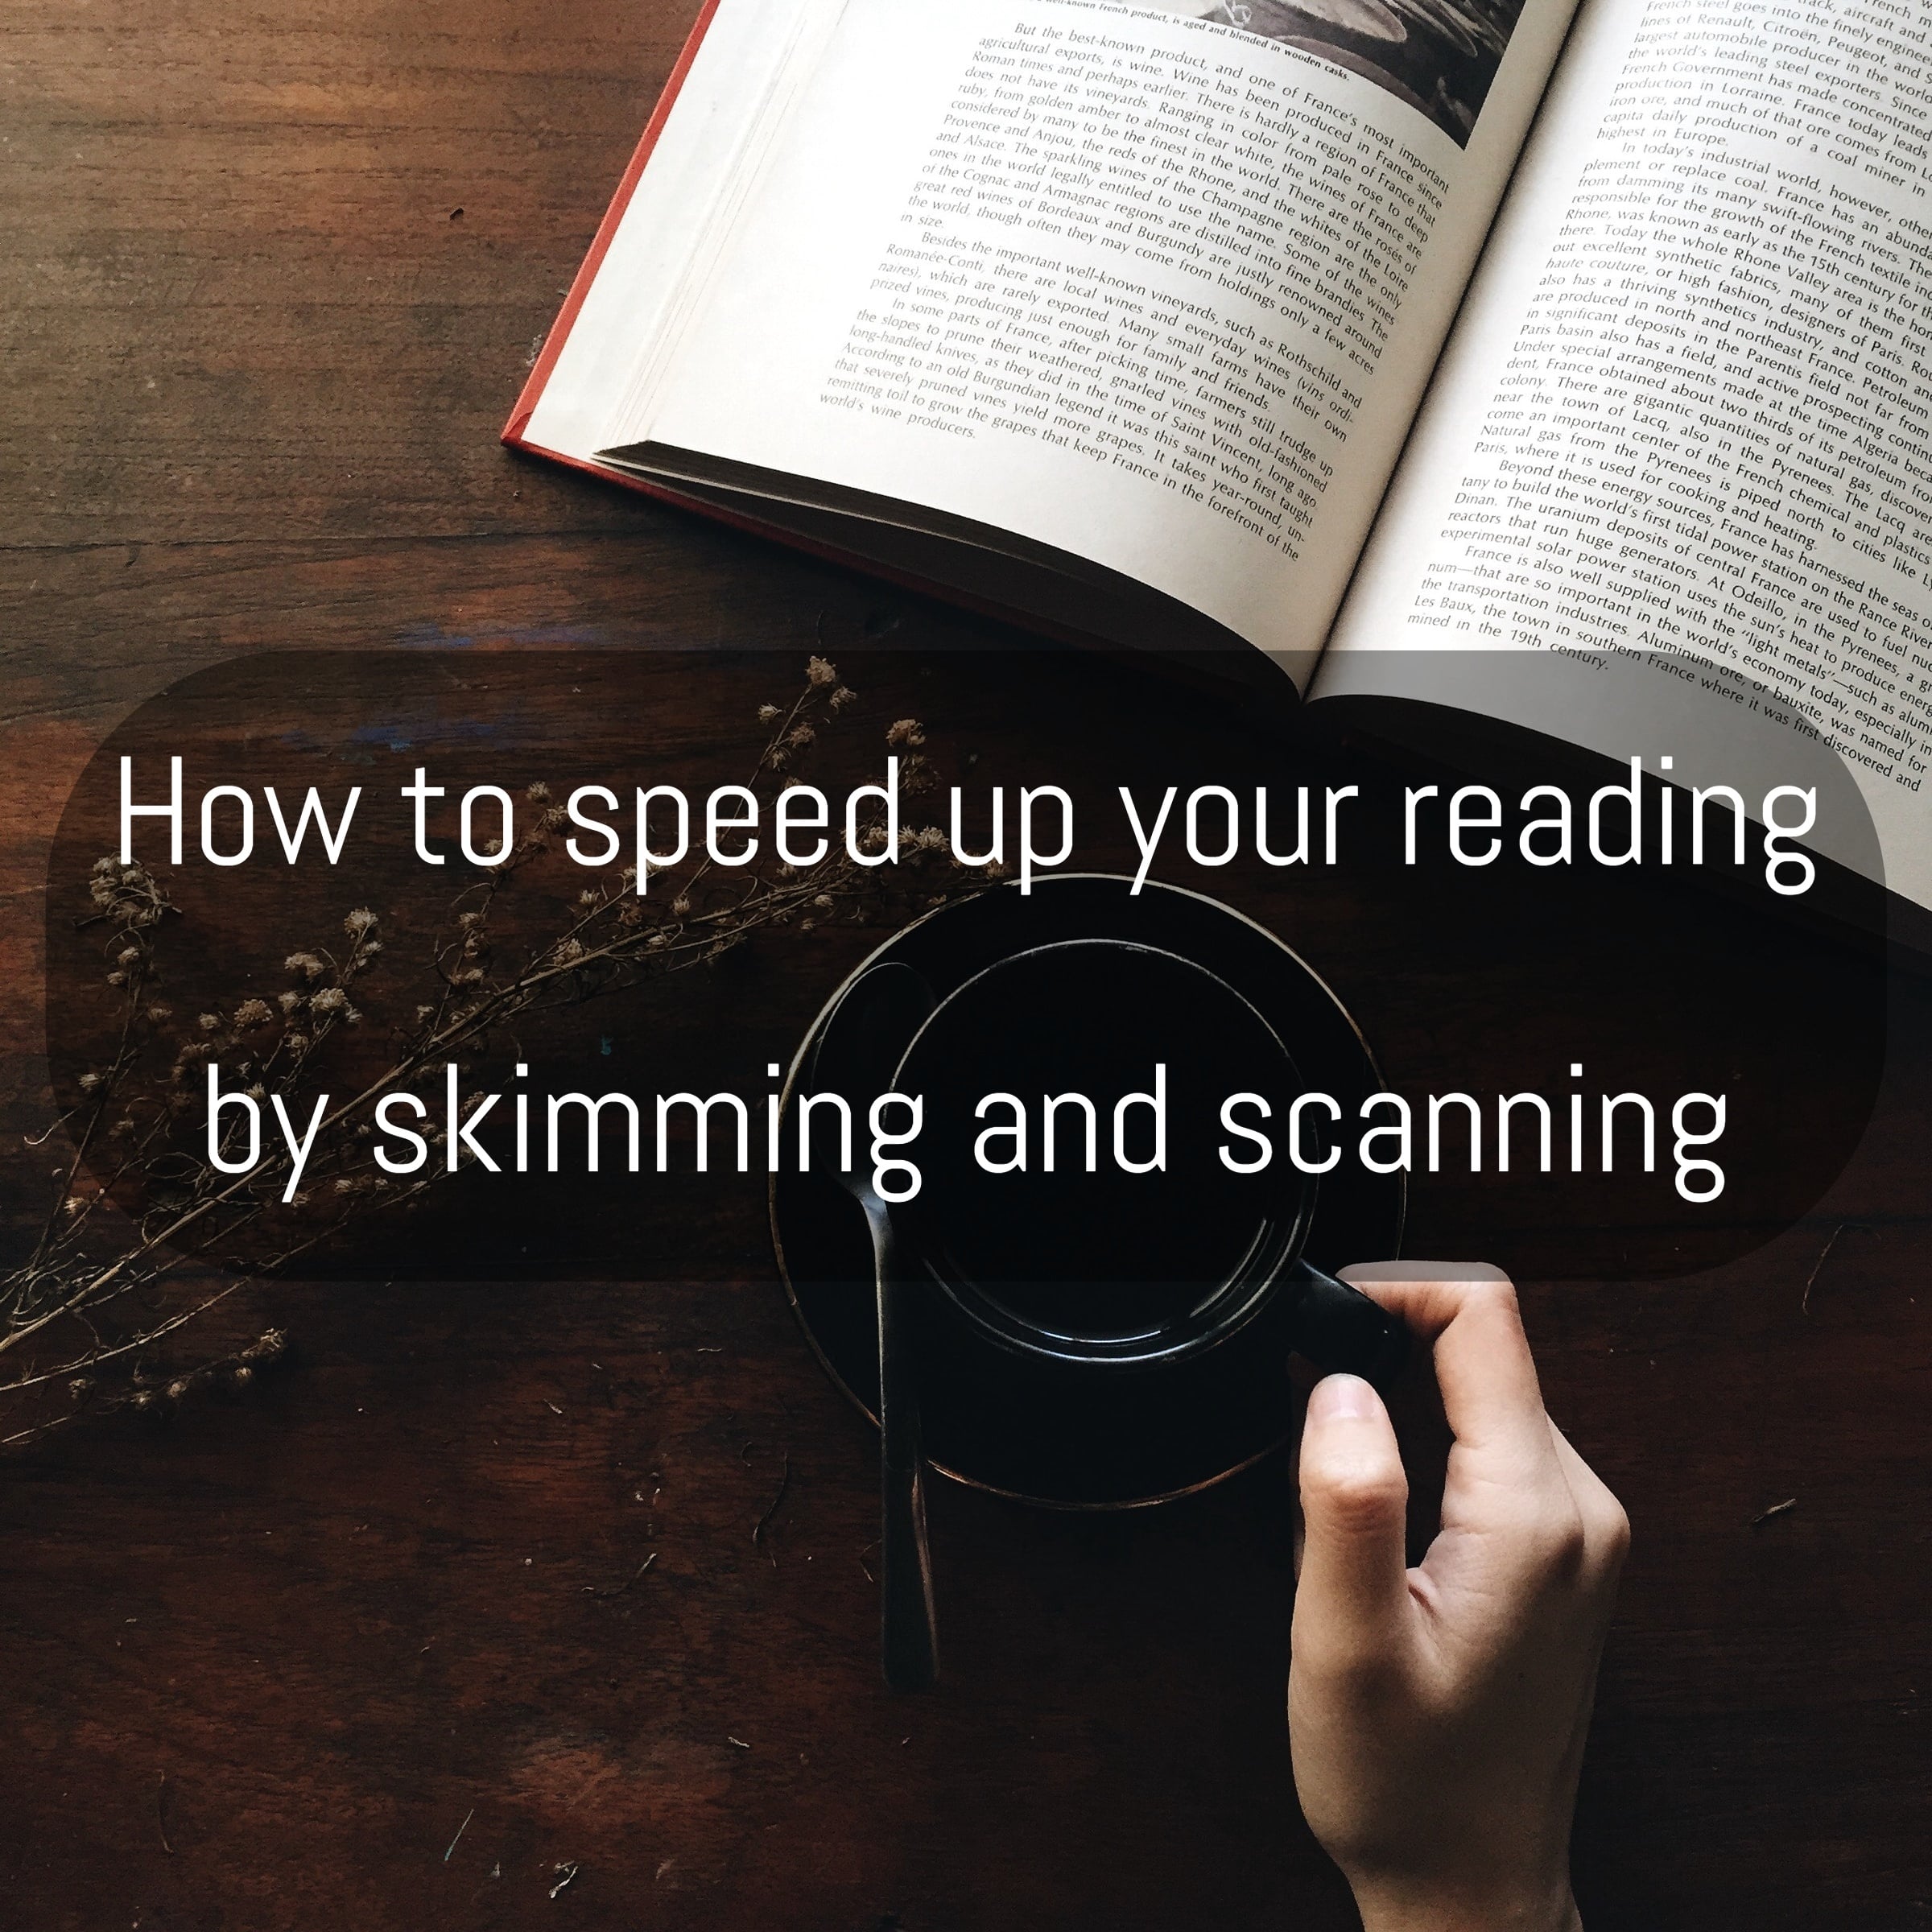 How to speed up your reading by skimming and scanning